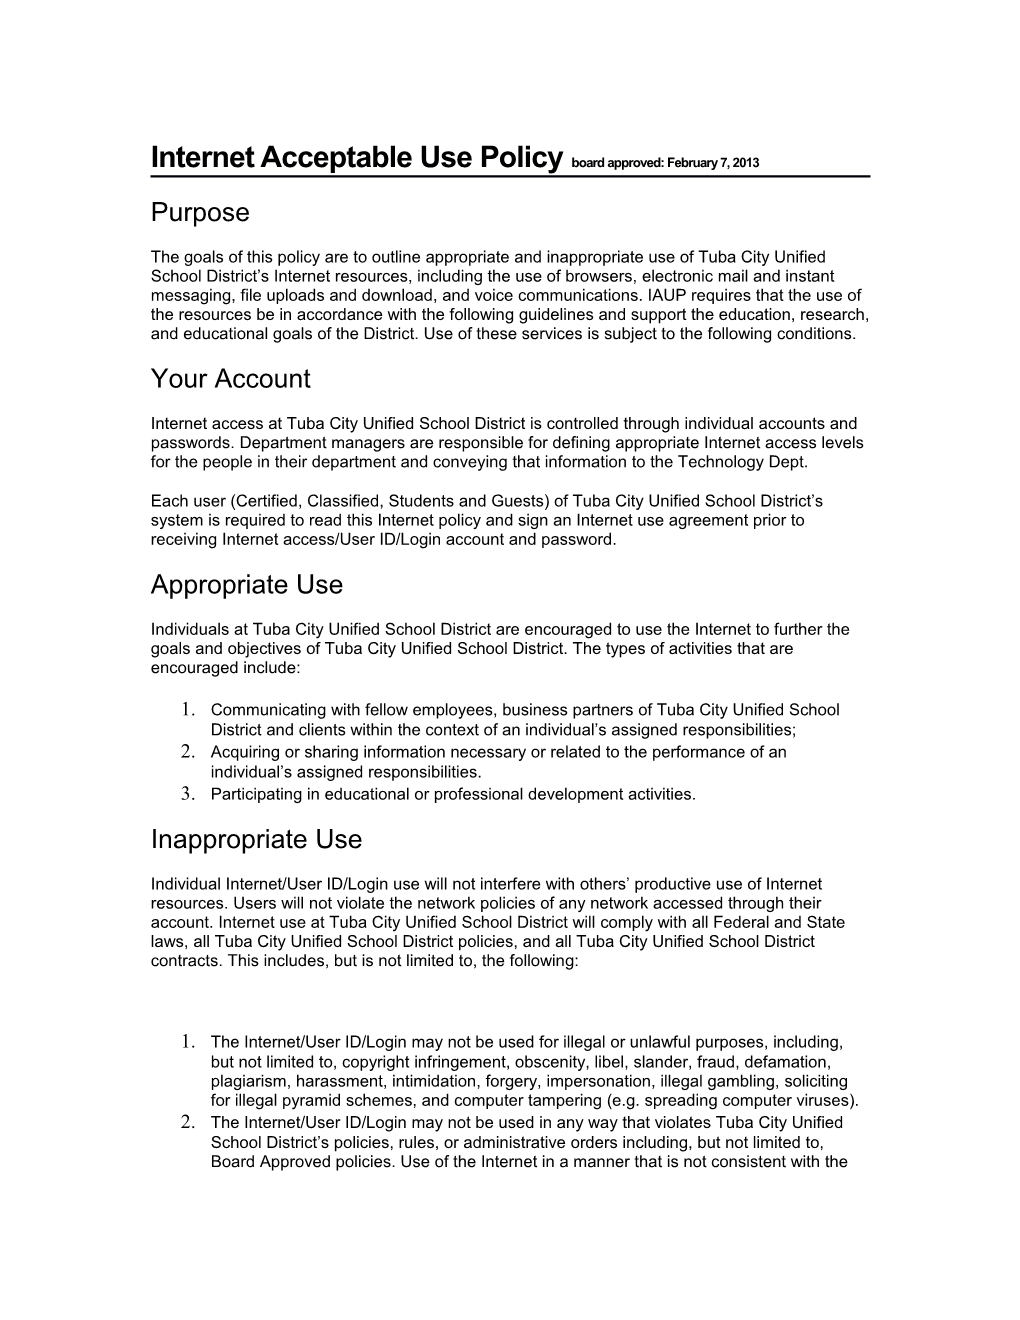 Internet Acceptable Use Policyboard Approved: February 7, 2013